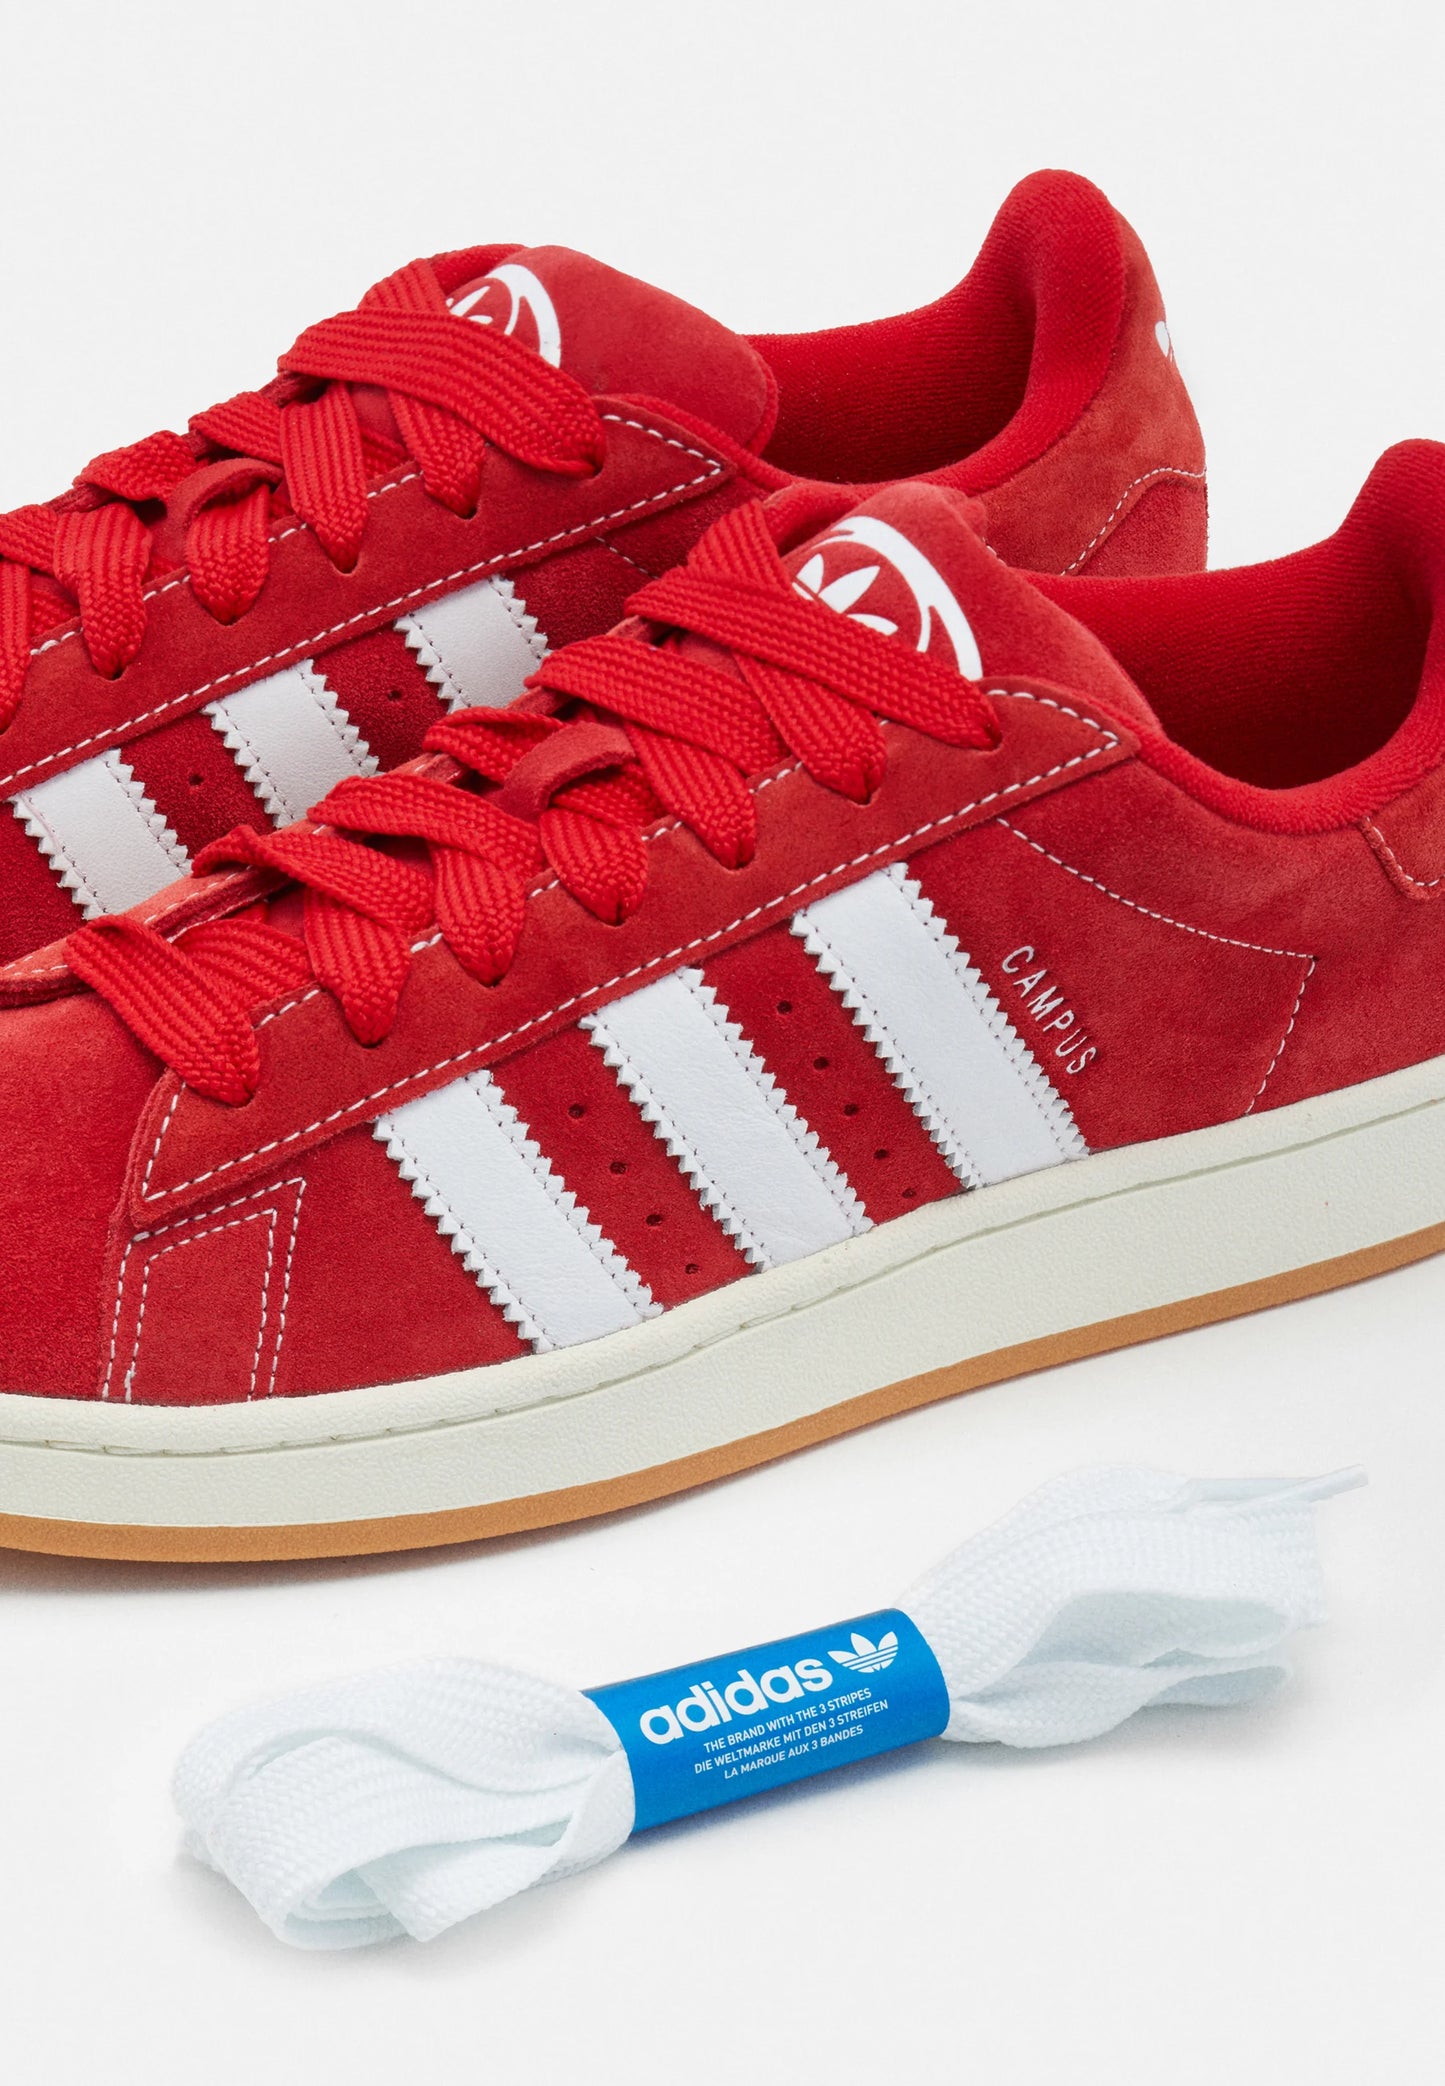 Adidas Campus 00s Better Scarlett – The Resell Sneaker